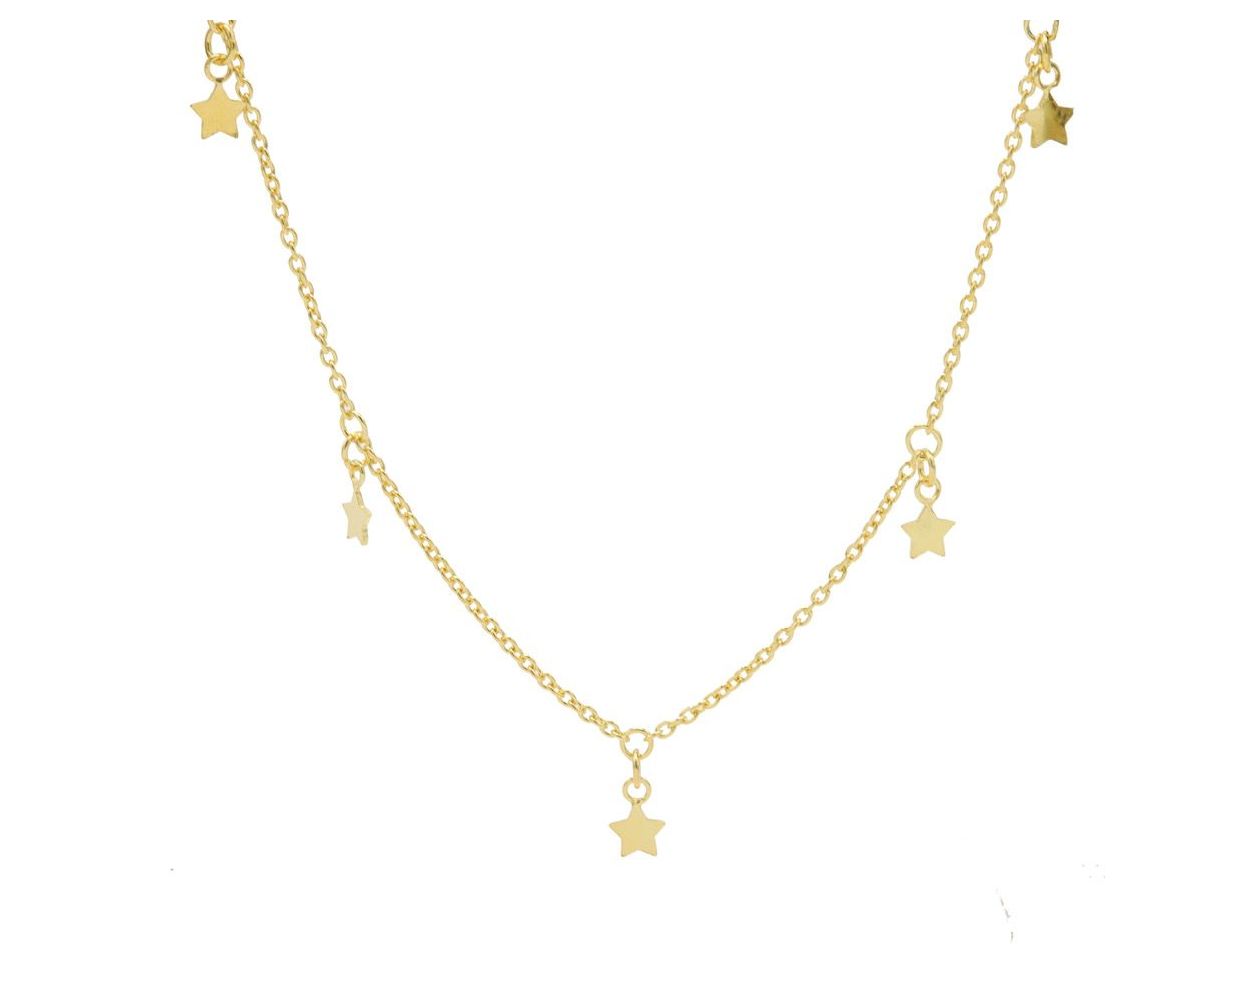 Karma Necklace 5 Stars - Gold plated